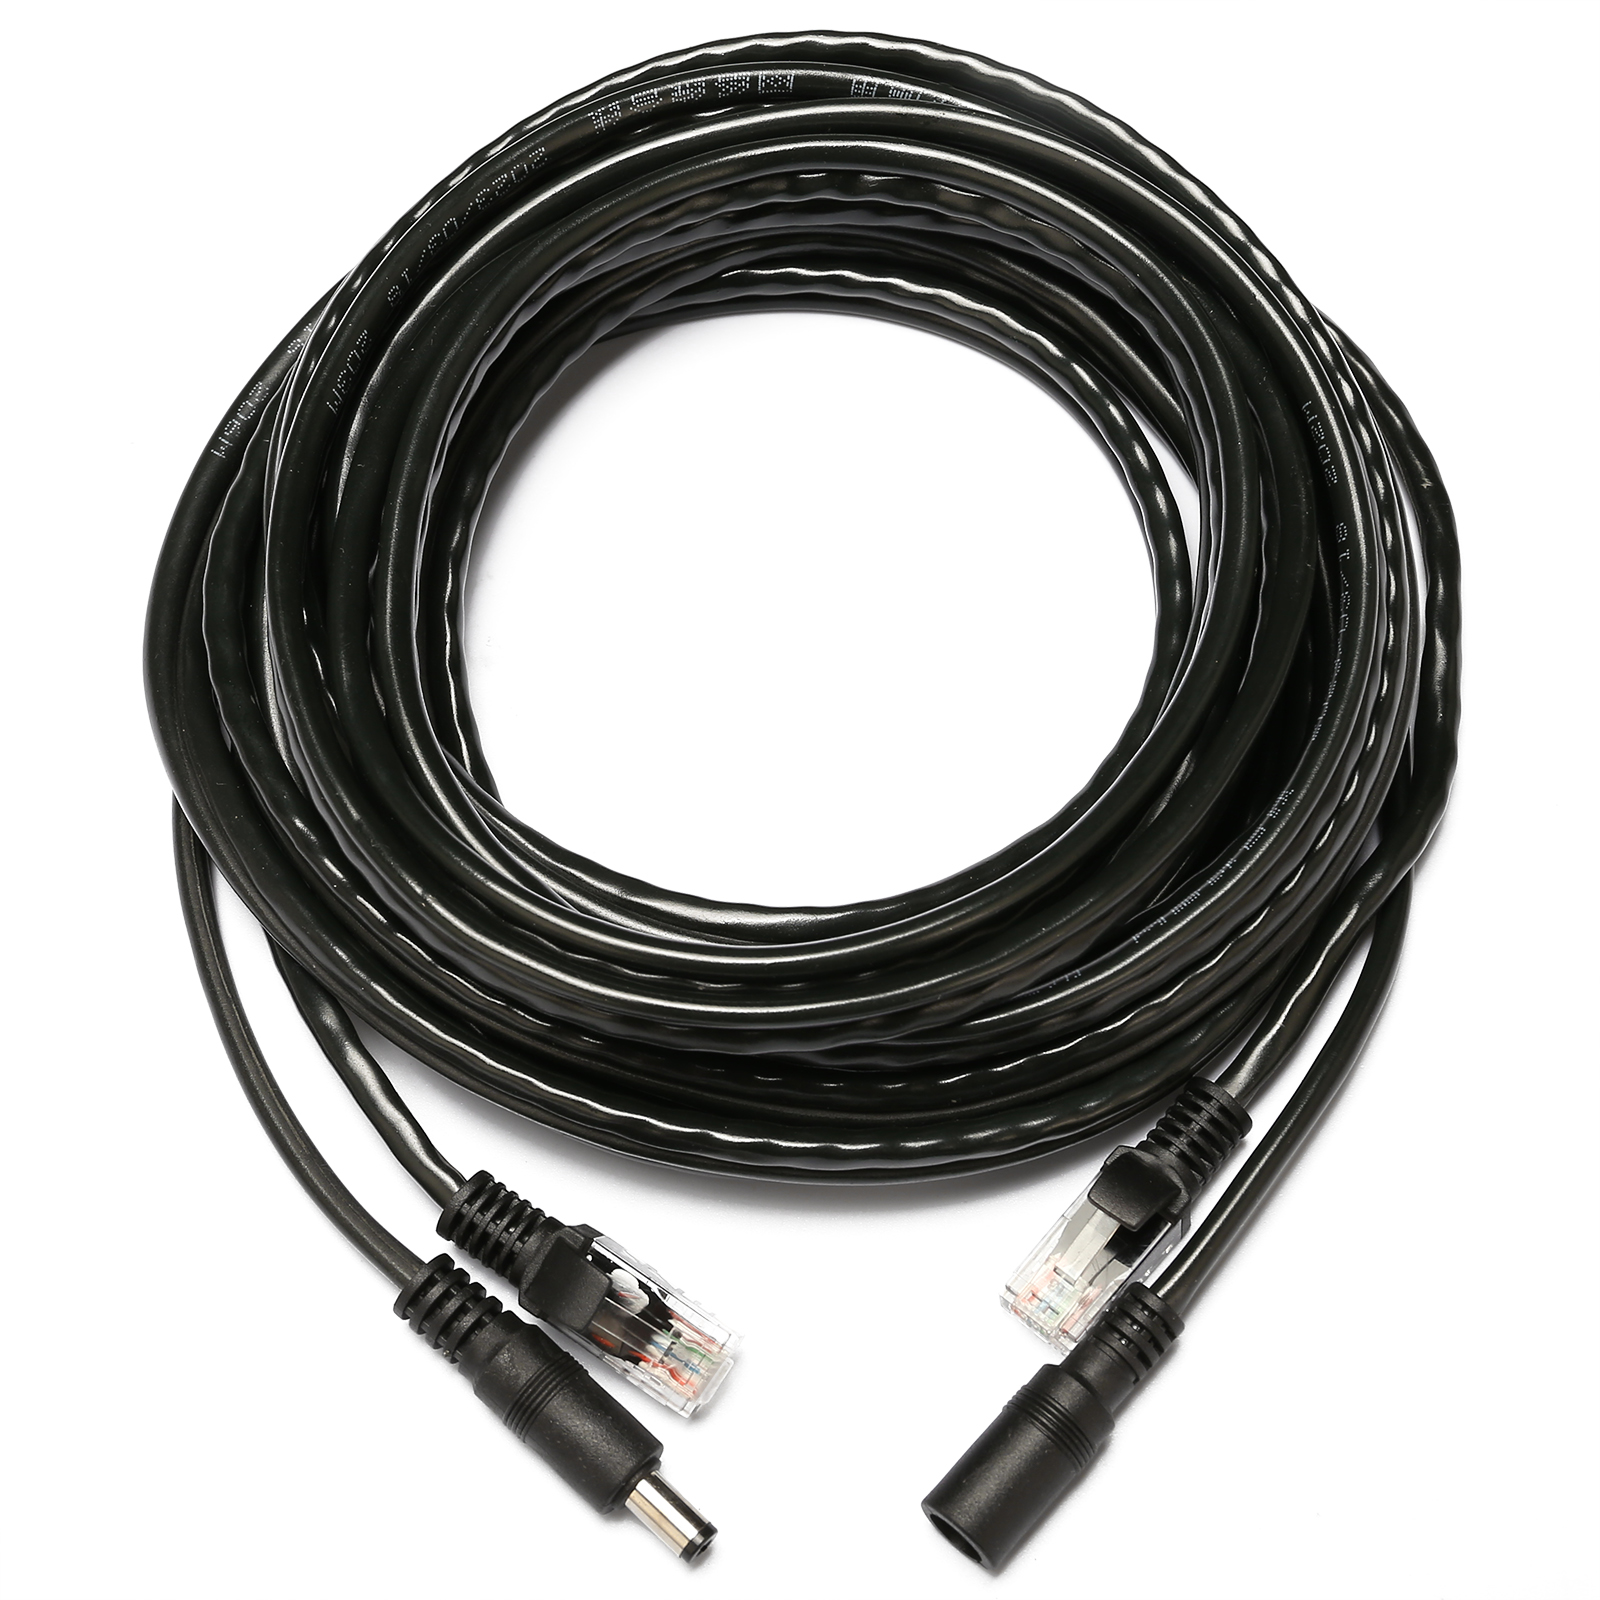 Network + Power extension cable for surveillance cameras